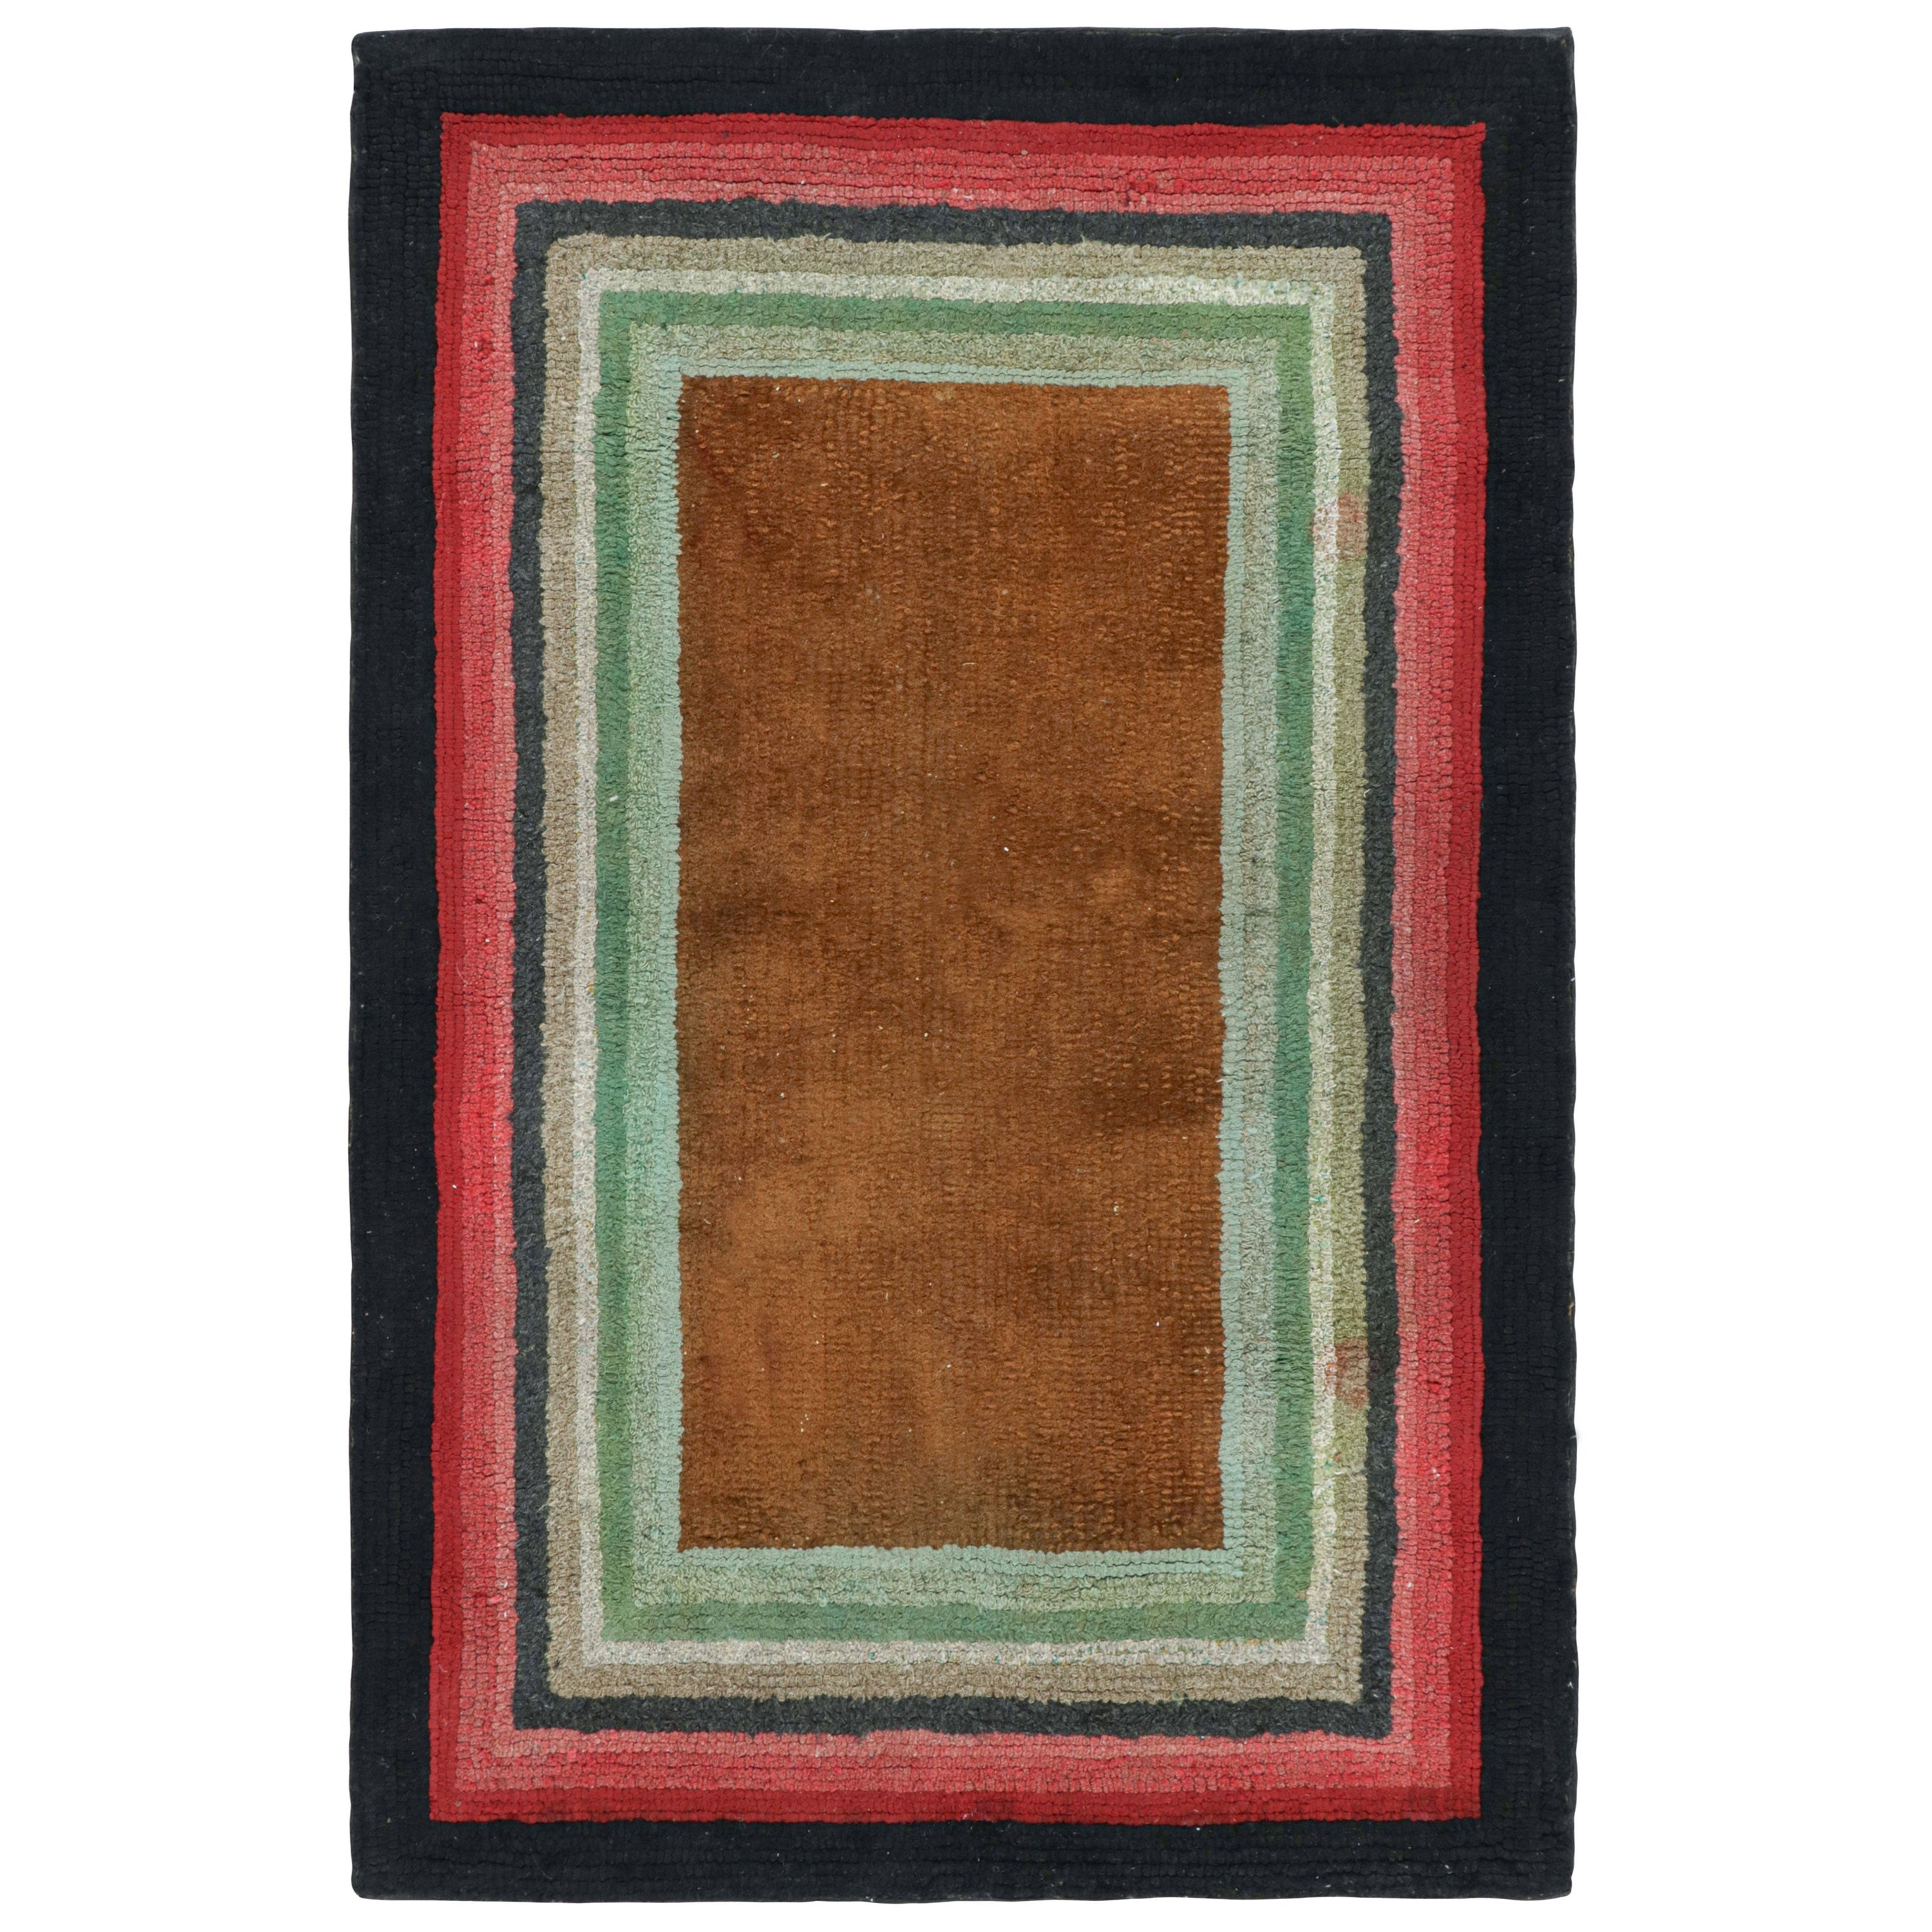 Antique Hooked Rug with Brown Open Field and Geometric Borders, from Rug & Kilim For Sale